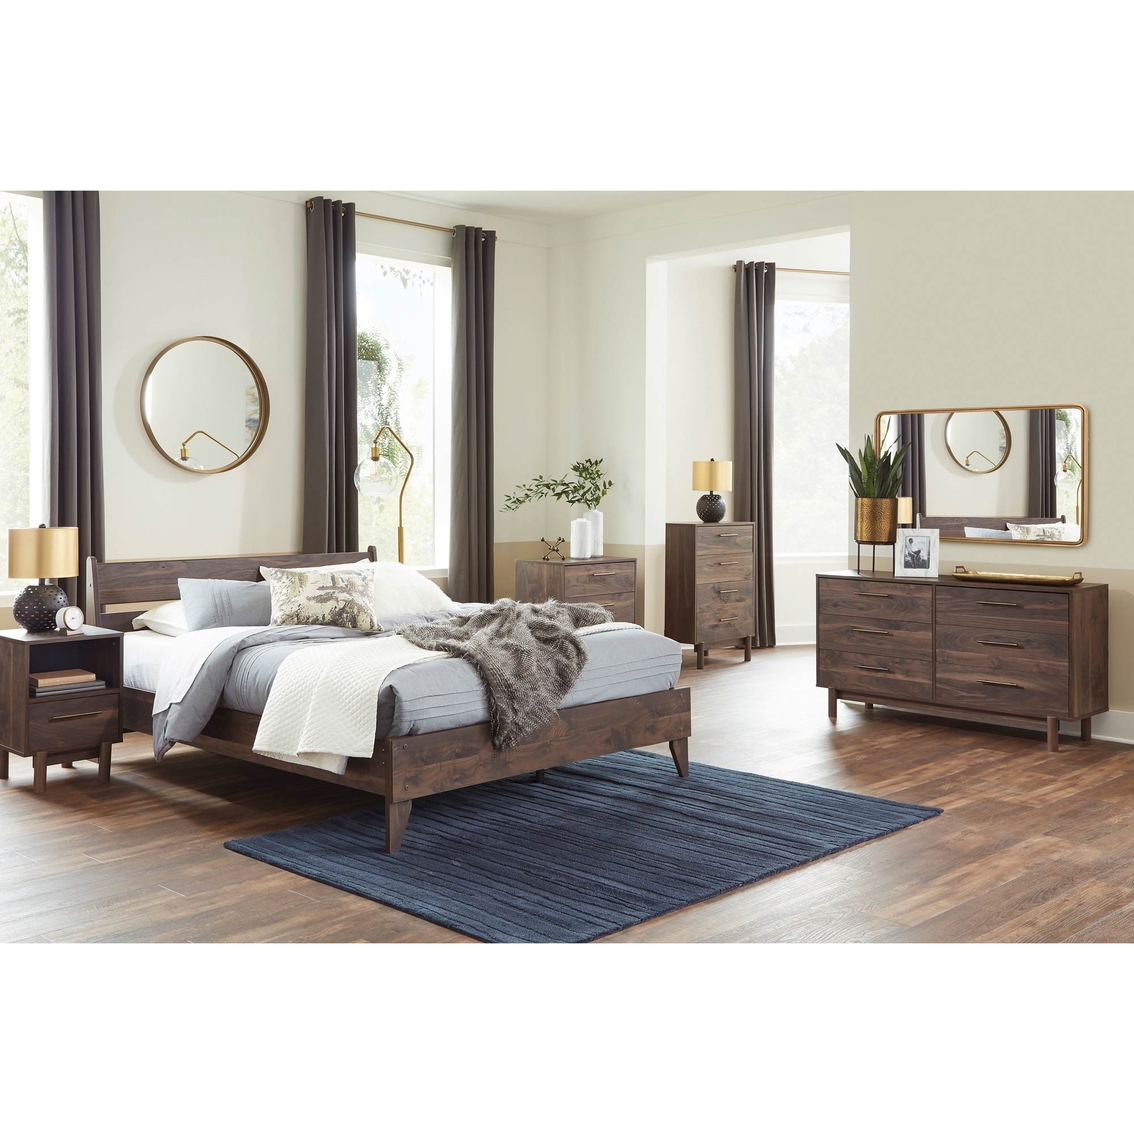 Signature Design by Ashley Calverson Platform Bed with Headboard - Image 6 of 6